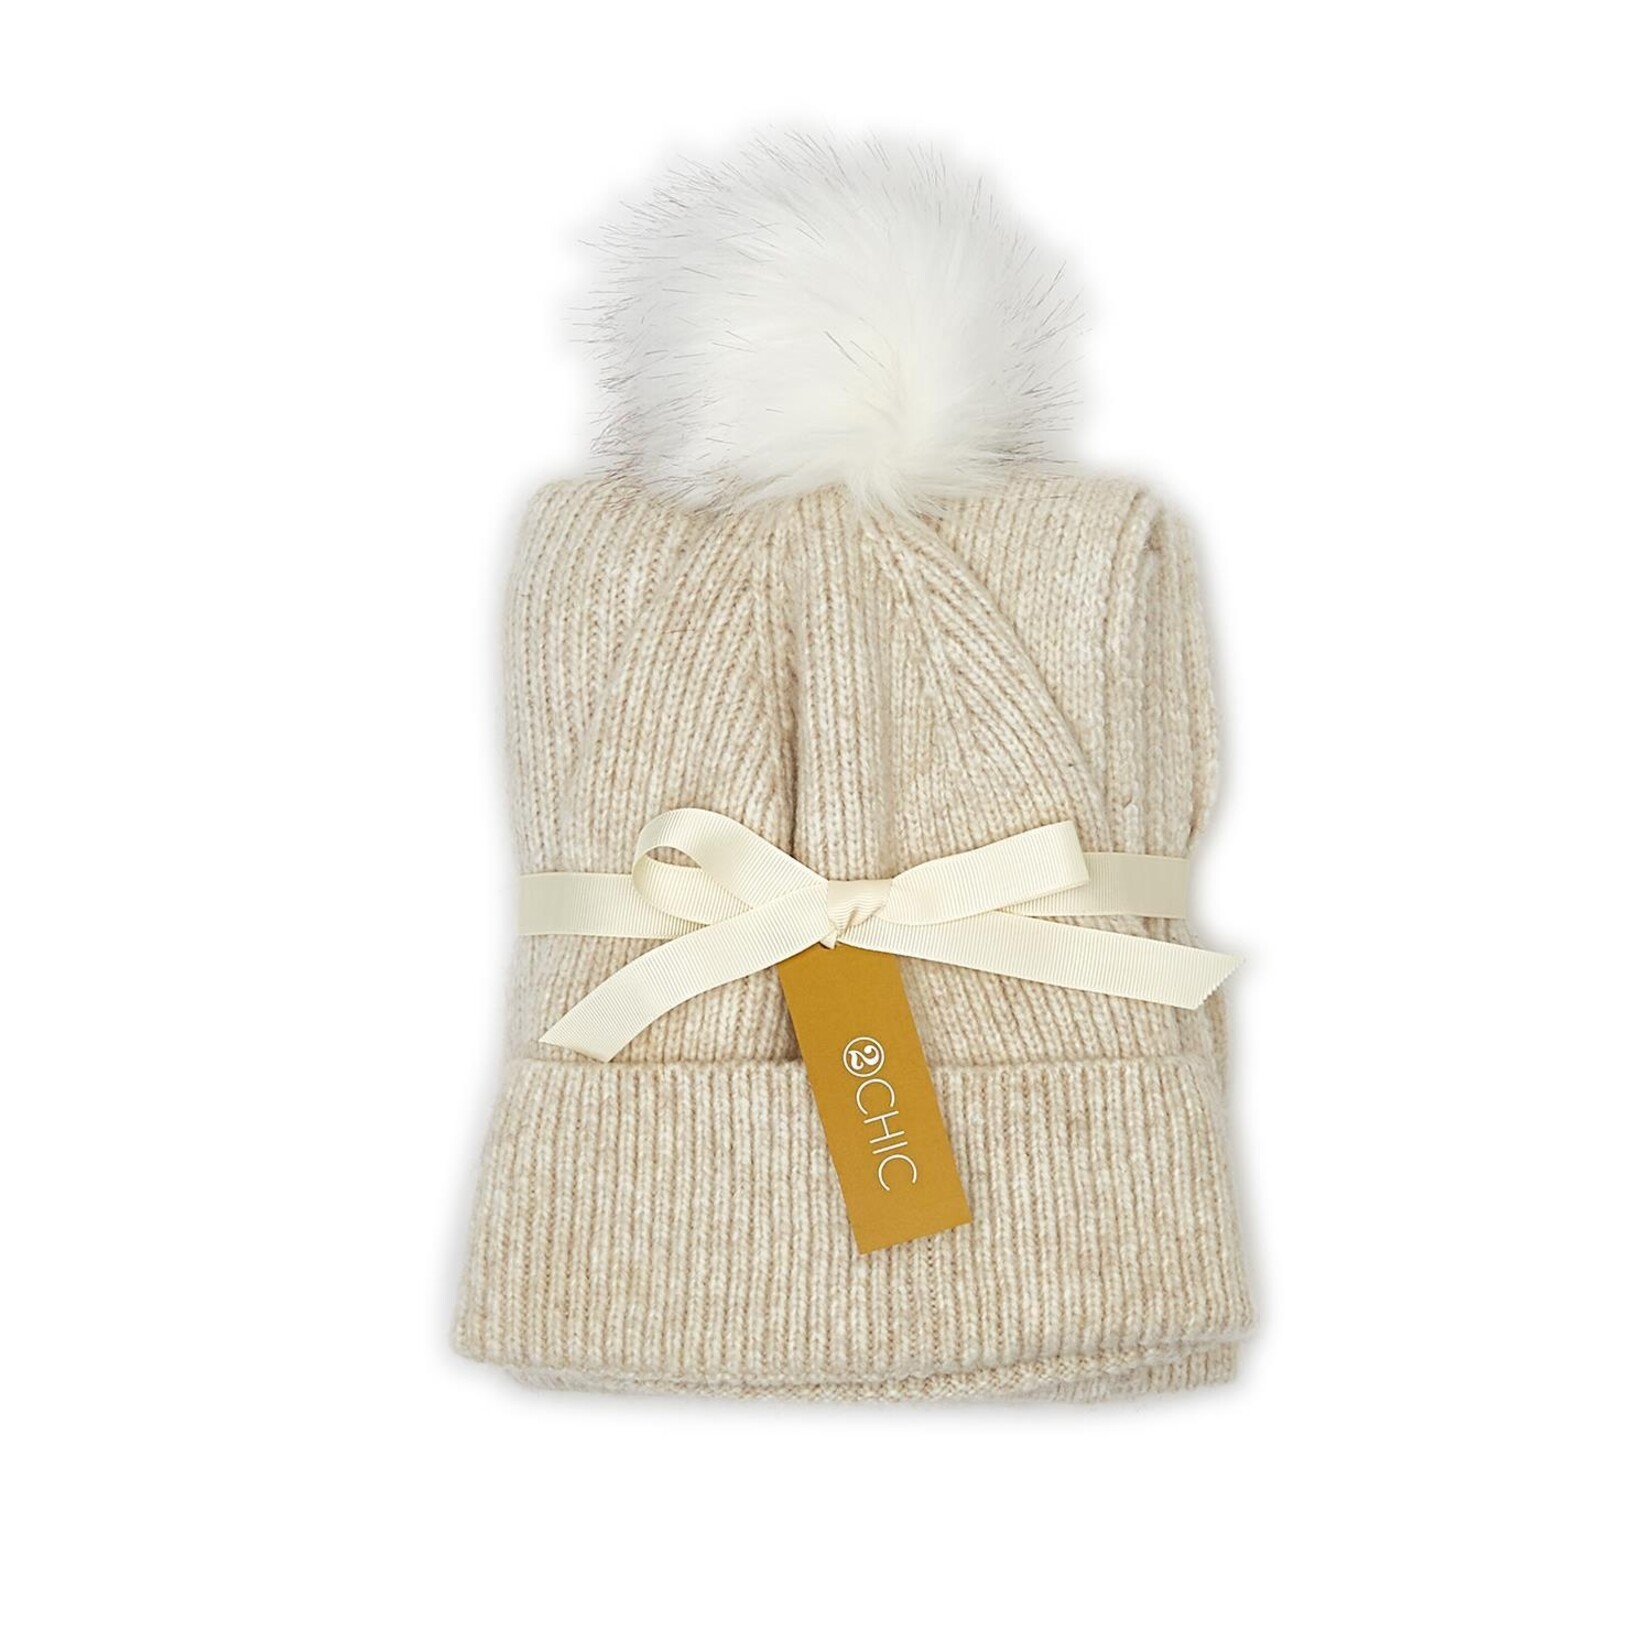 Two's Company Dynamic Duo Softer than Cashmere Knit Hat with Faux Fur Pom and Coordinating Knit Scarf